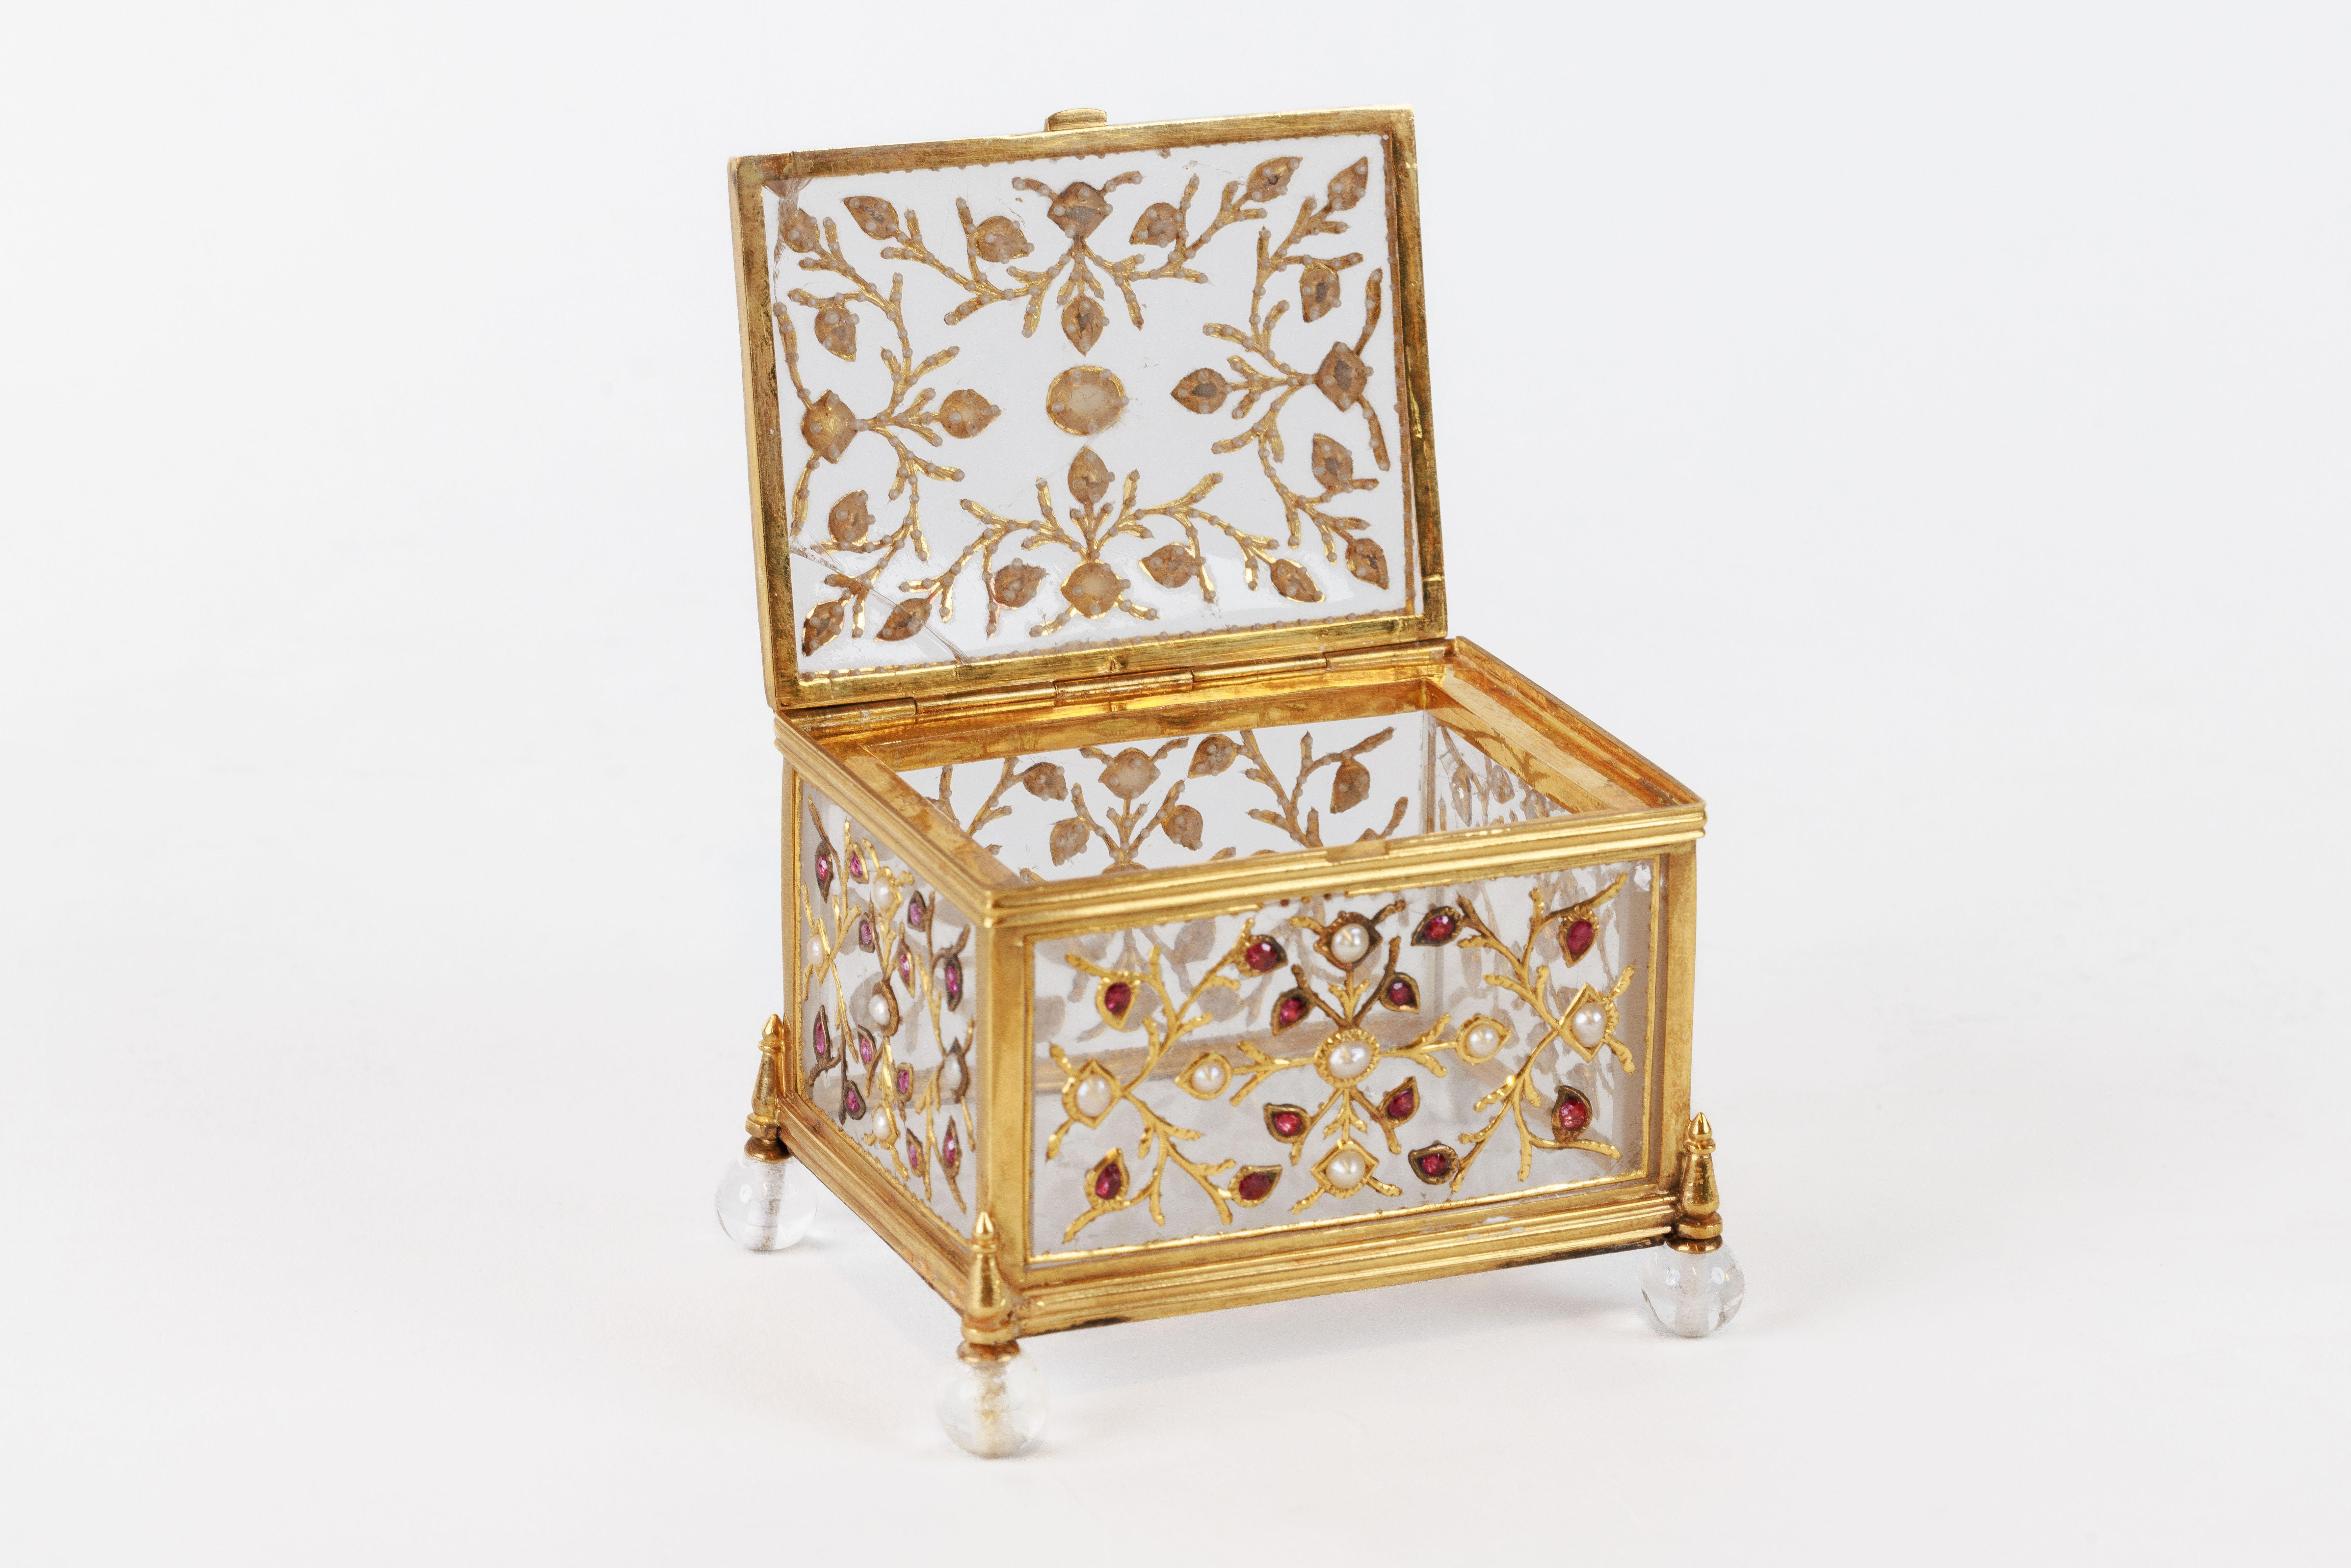 Single Cut Fine Mughal Gem Set Rock Crystal and Gold Box, India, 18th Century For Sale